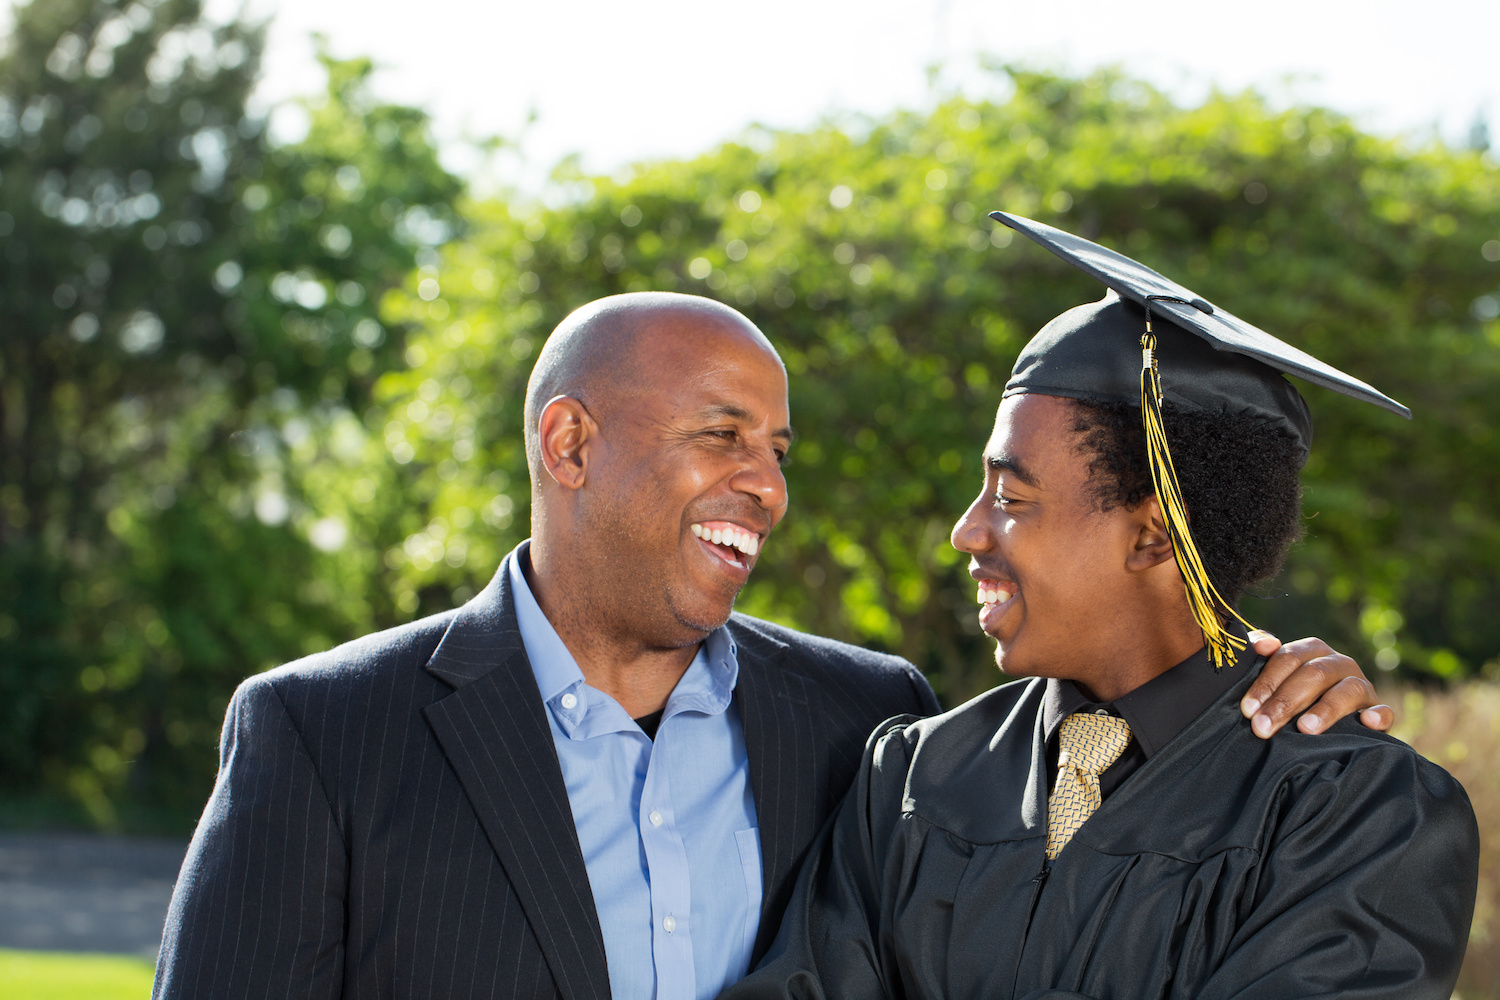 person in a blazer and button down shirt with their arm around a younger person (presumably their son) wearing a graduation cap and gown